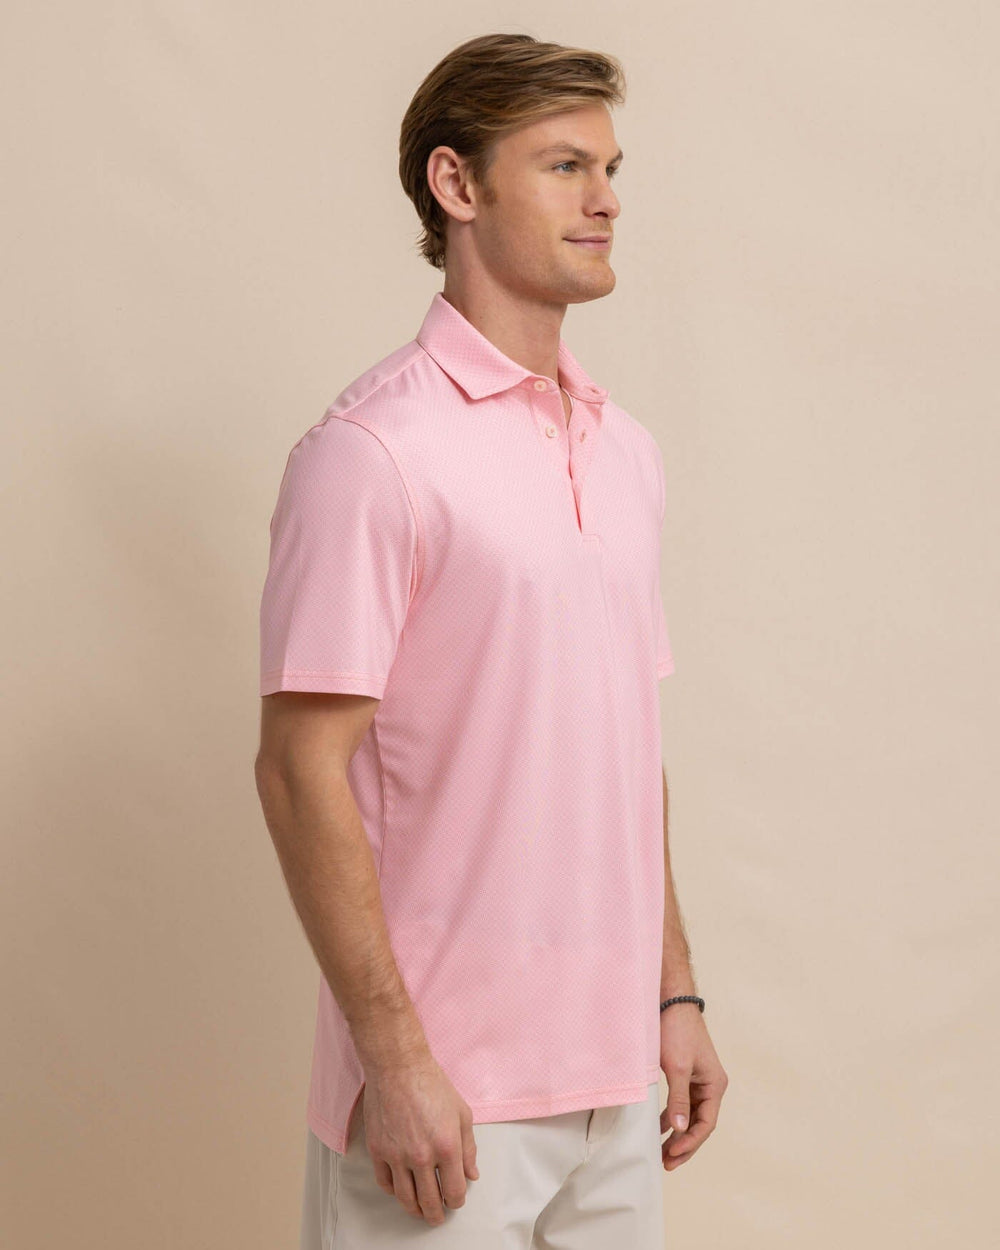 The front view of the Southern Tide Driver Coastal Geo Polo Shirt by Southern Tide - Flamingo Pink